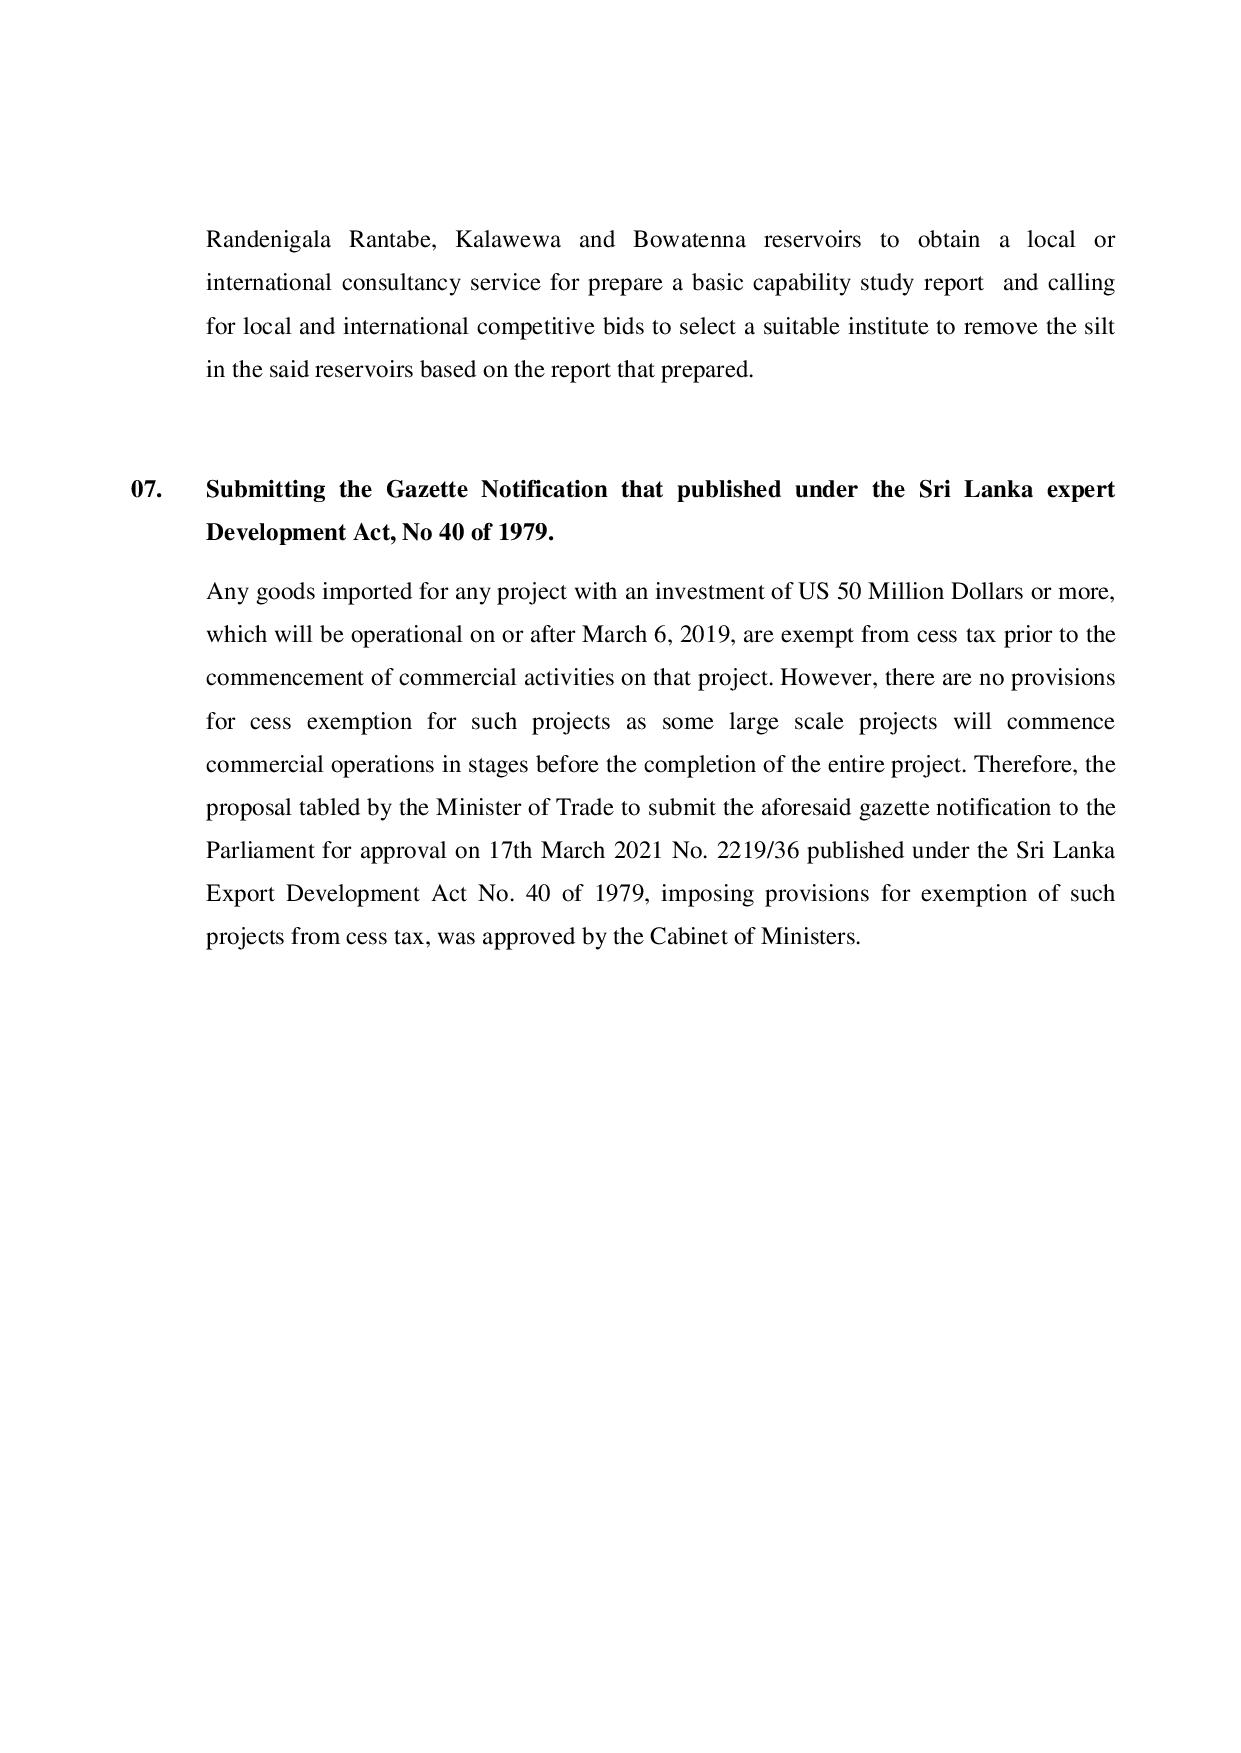 Cabinet Decisions on 10.05.2021 English page 004